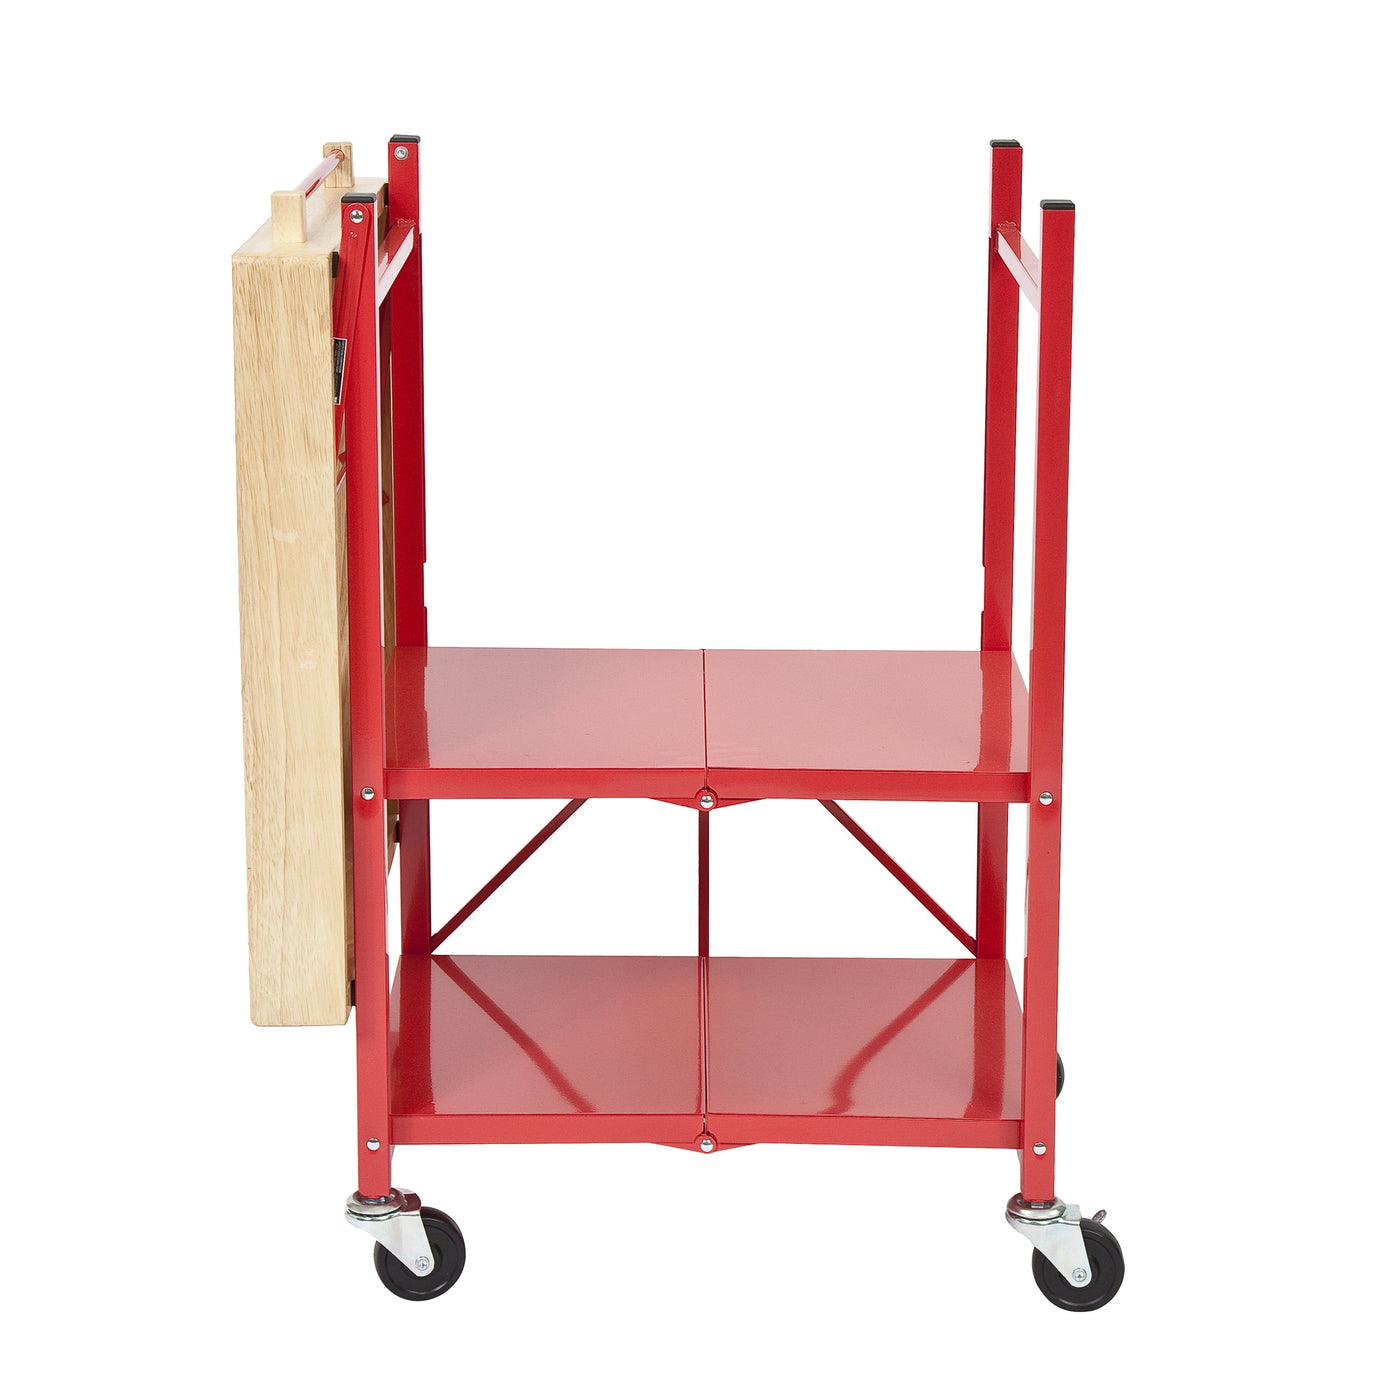 Foldout 3-Tier Kitchen Serving Island Cart With Wheels